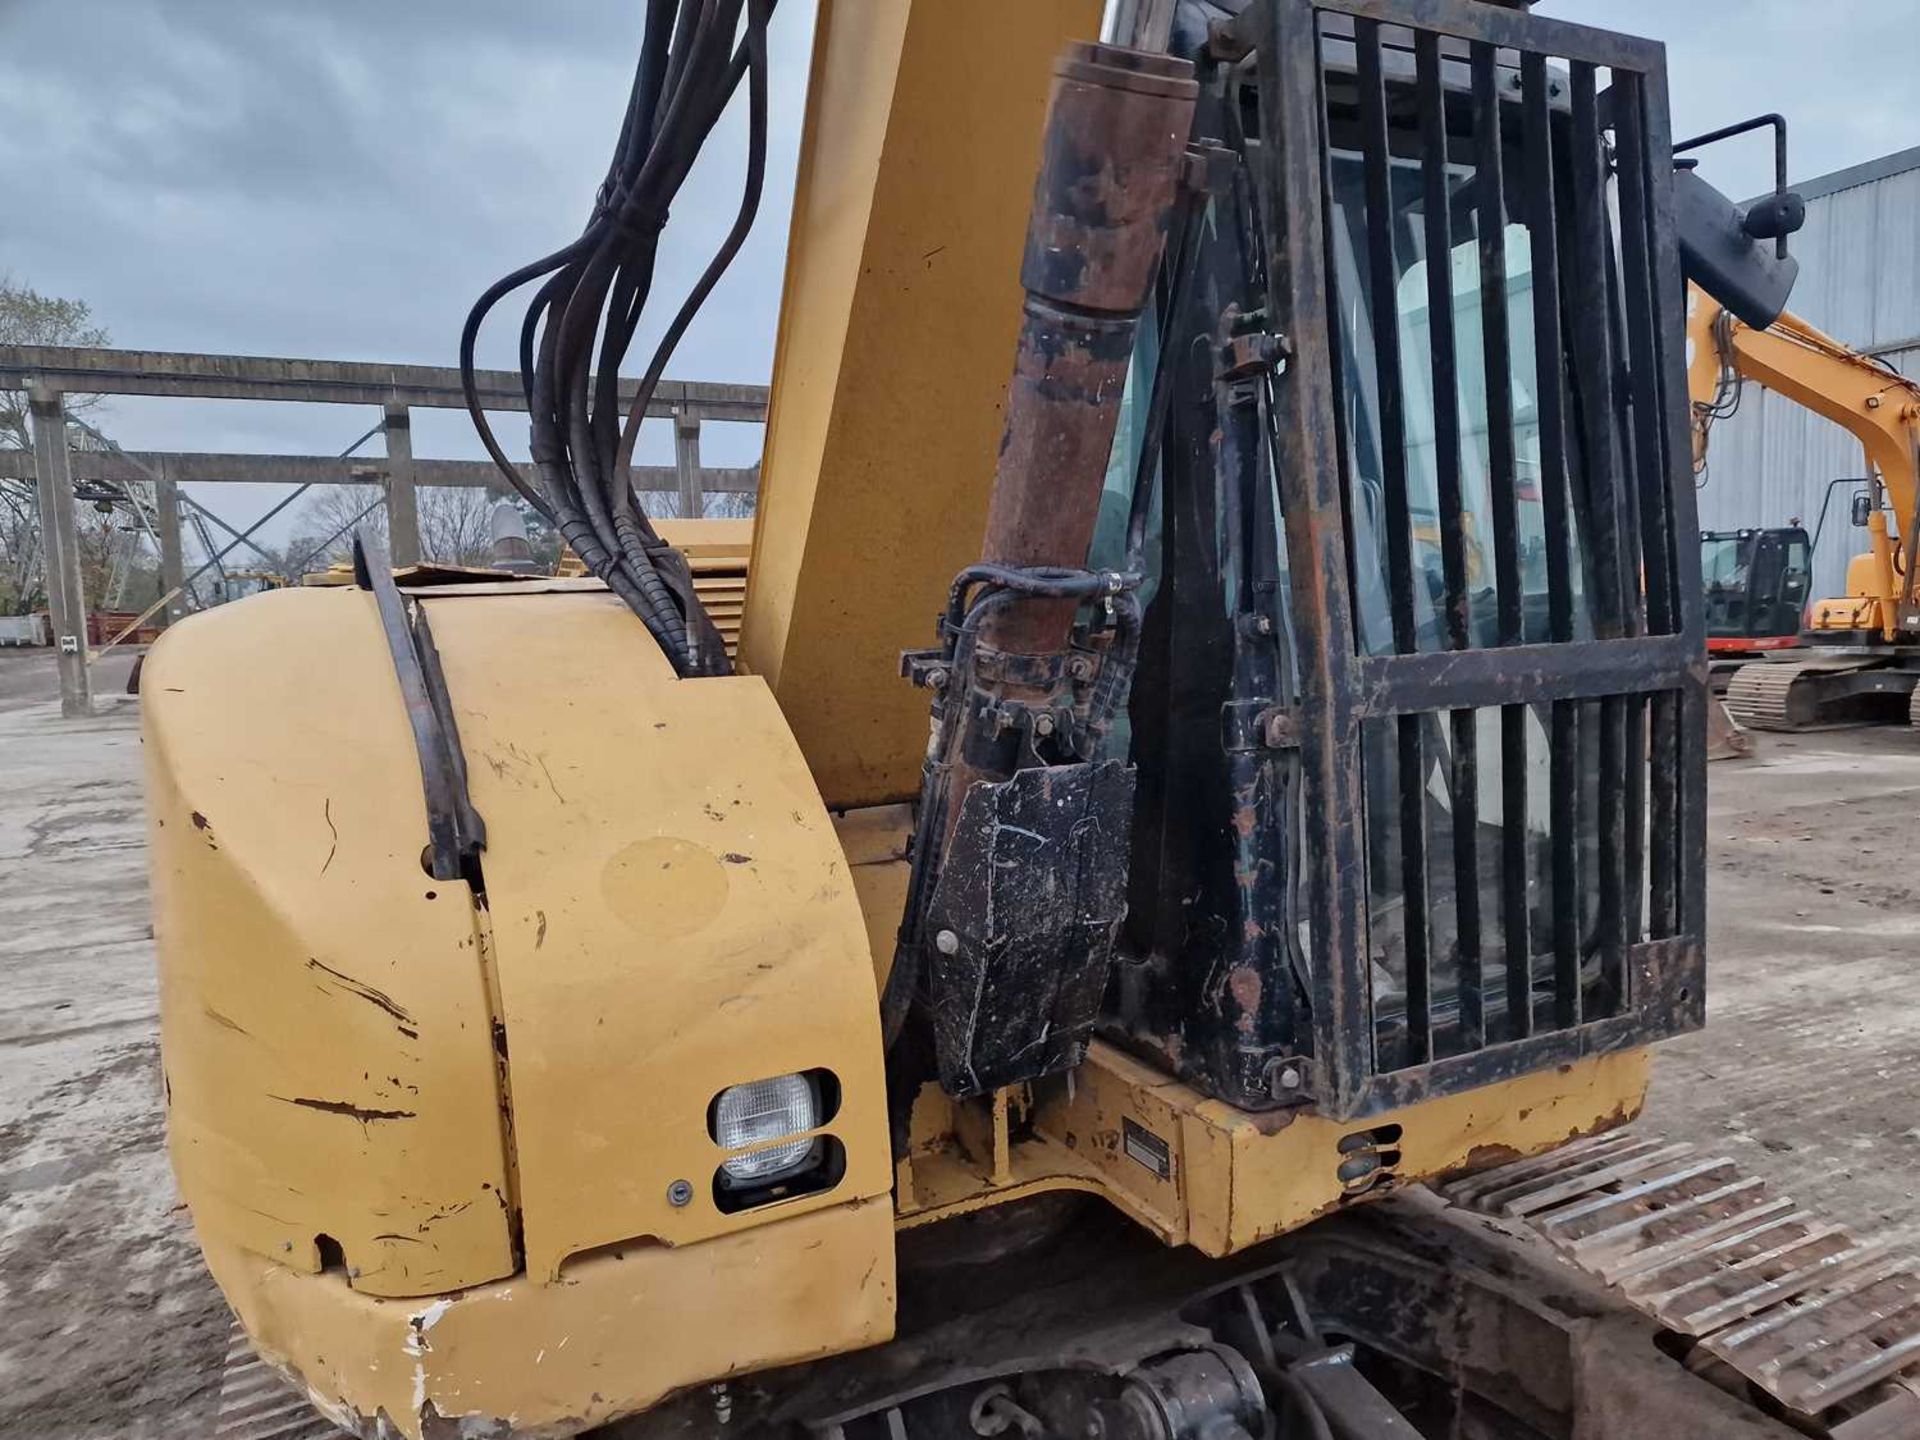 2008 CAT 308C CR 450mm Steel Tracks, Blade, CV, Hydraulic QH, Piped, Aux. Piping, A/C, Demo Cage - Image 47 of 102